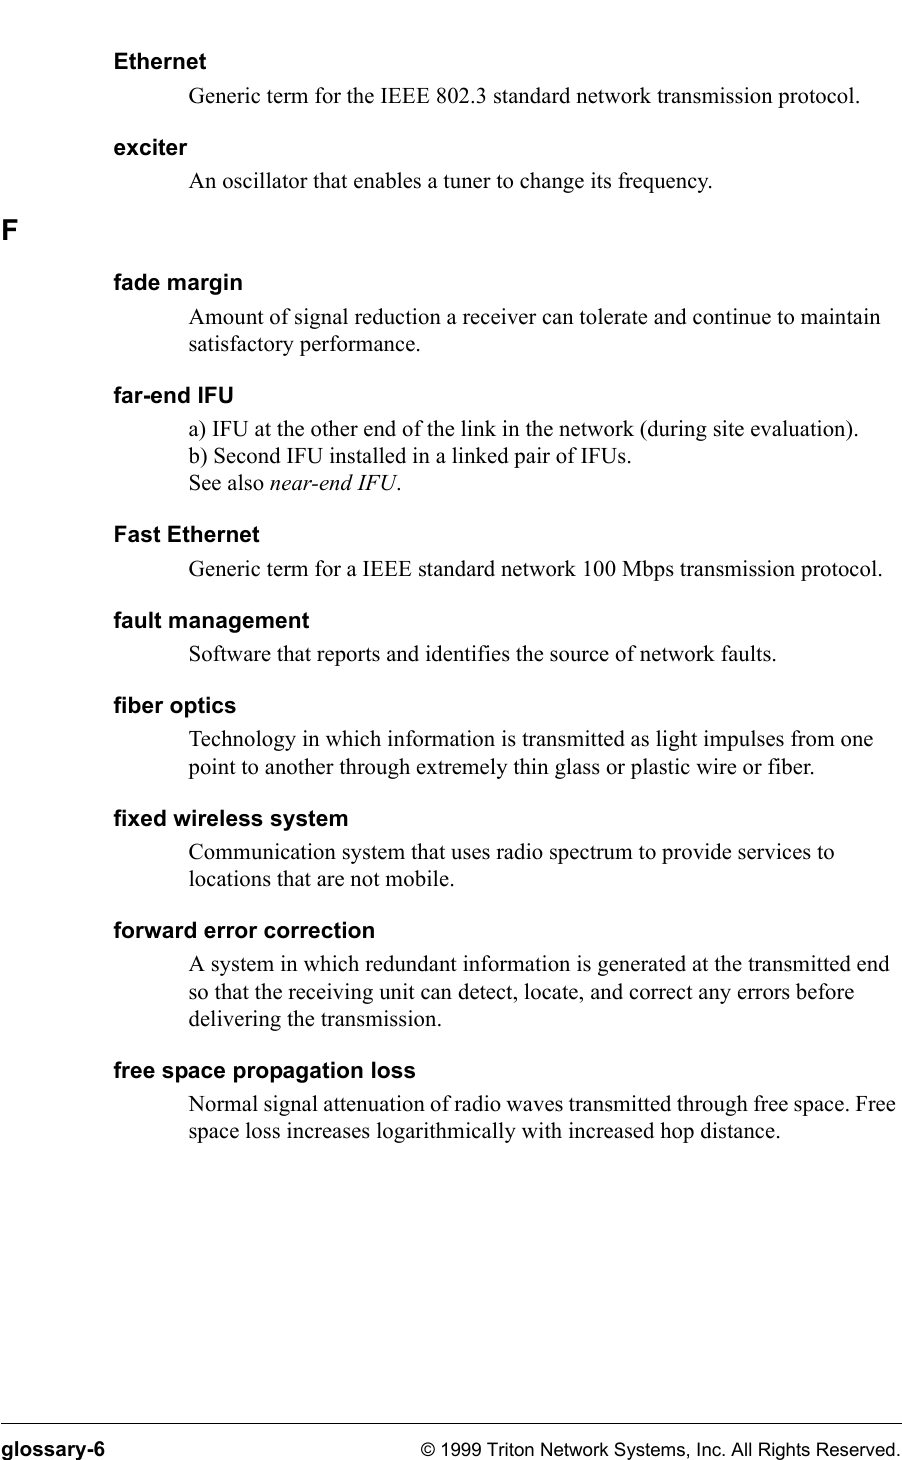 glossary-6 © 1999 Triton Network Systems, Inc. All Rights Reserved.EthernetGeneric term for the IEEE 802.3 standard network transmission protocol.exciterAn oscillator that enables a tuner to change its frequency.Ffade marginAmount of signal reduction a receiver can tolerate and continue to maintain satisfactory performance.far-end IFUa) IFU at the other end of the link in the network (during site evaluation).b) Second IFU installed in a linked pair of IFUs.See also near-end IFU.Fast EthernetGeneric term for a IEEE standard network 100 Mbps transmission protocol.fault managementSoftware that reports and identifies the source of network faults.fiber opticsTechnology in which information is transmitted as light impulses from one point to another through extremely thin glass or plastic wire or fiber.fixed wireless systemCommunication system that uses radio spectrum to provide services to locations that are not mobile.forward error correctionA system in which redundant information is generated at the transmitted end so that the receiving unit can detect, locate, and correct any errors before delivering the transmission.free space propagation lossNormal signal attenuation of radio waves transmitted through free space. Free space loss increases logarithmically with increased hop distance. 